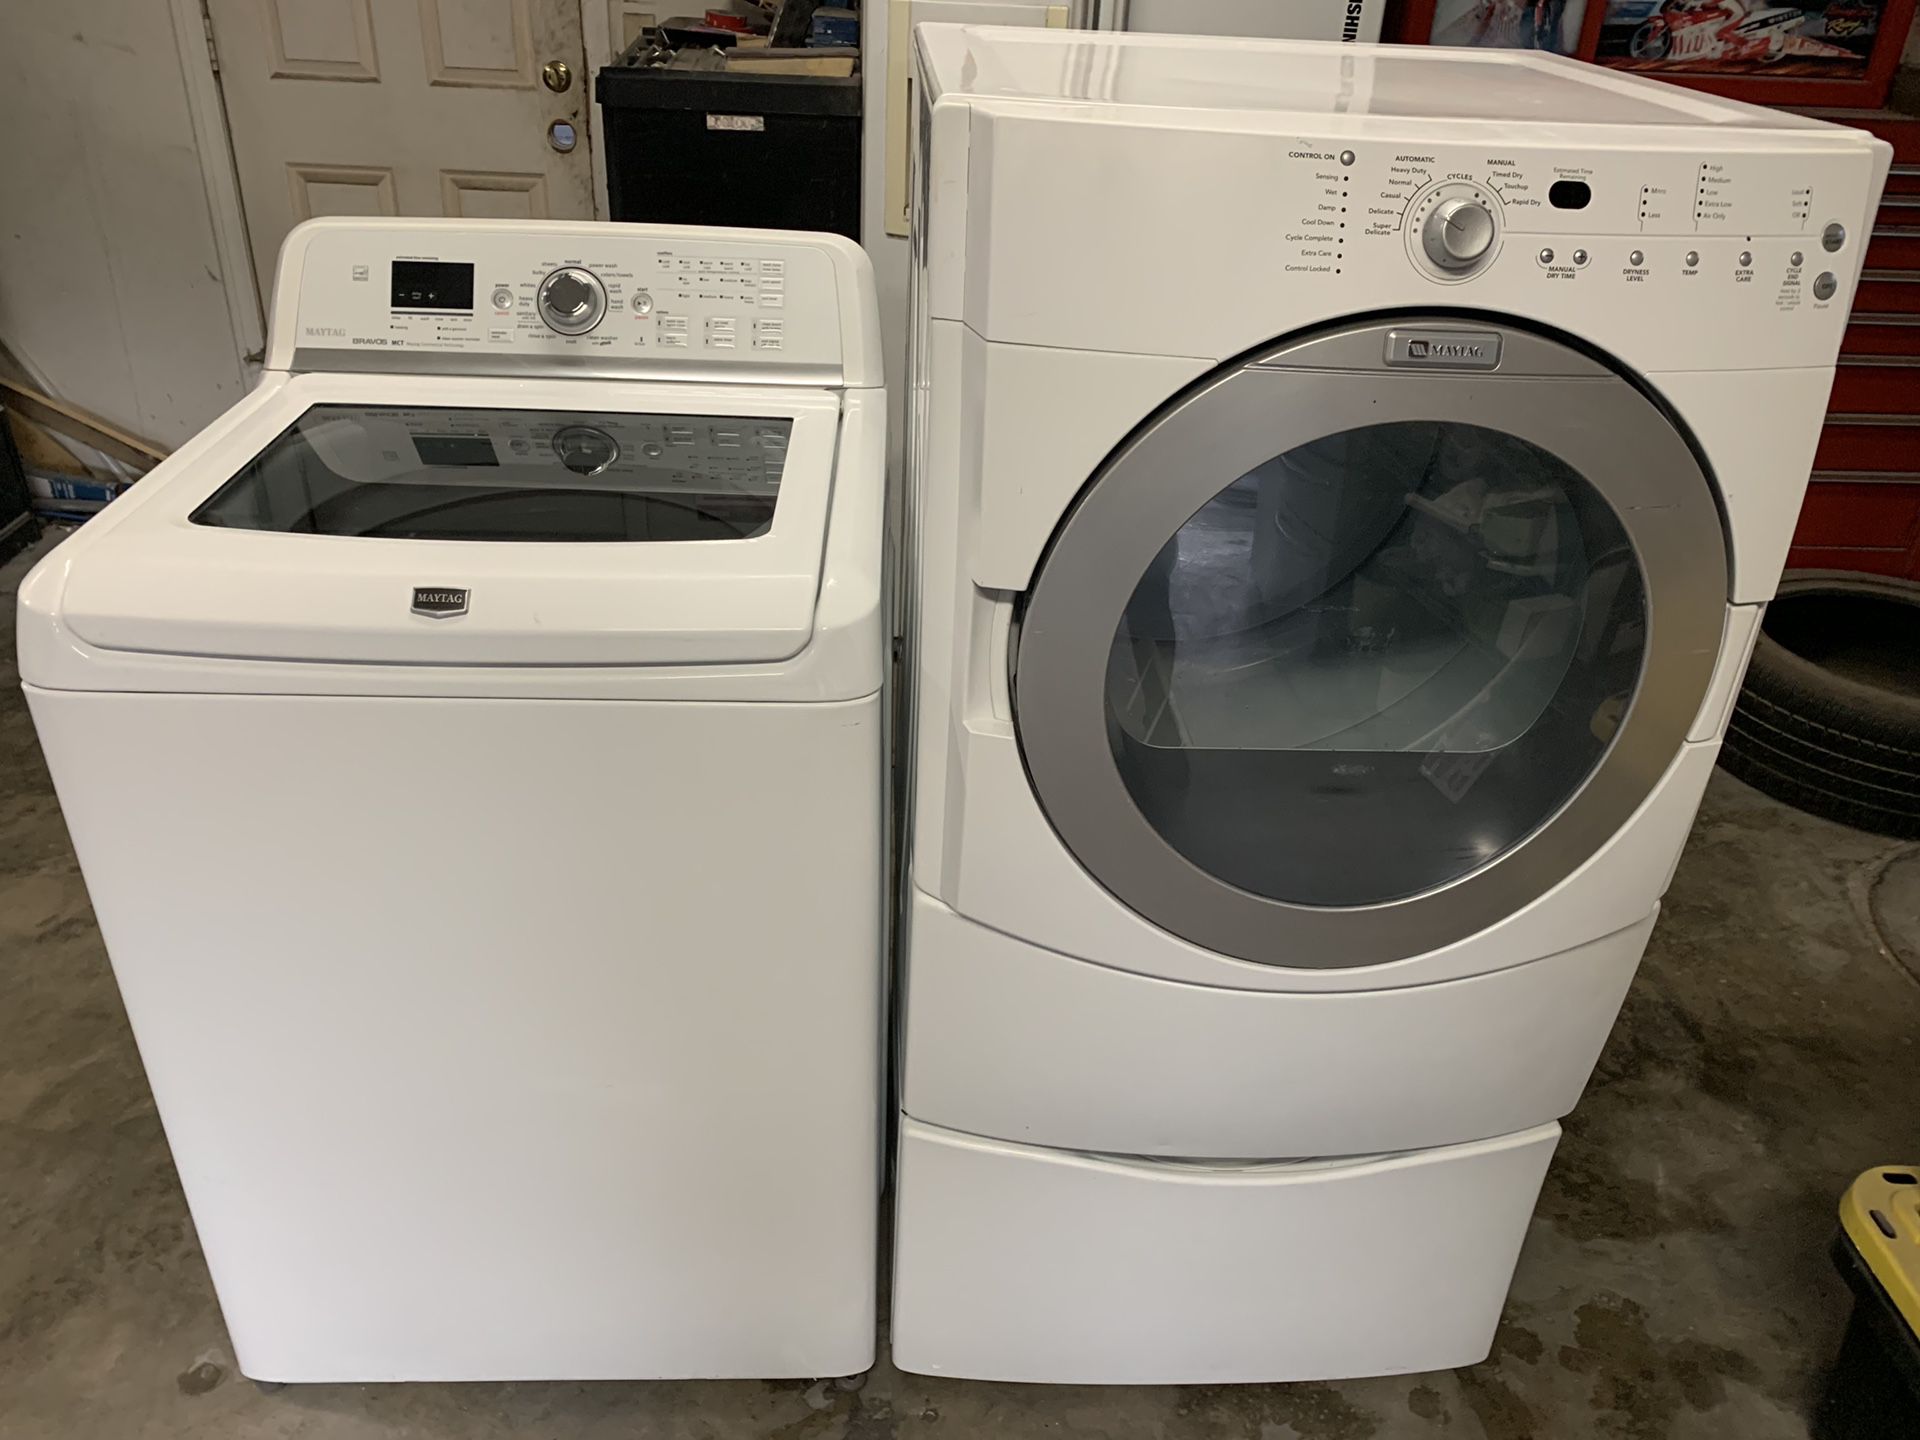 Maytag washer and front load gas dryer with pedestal